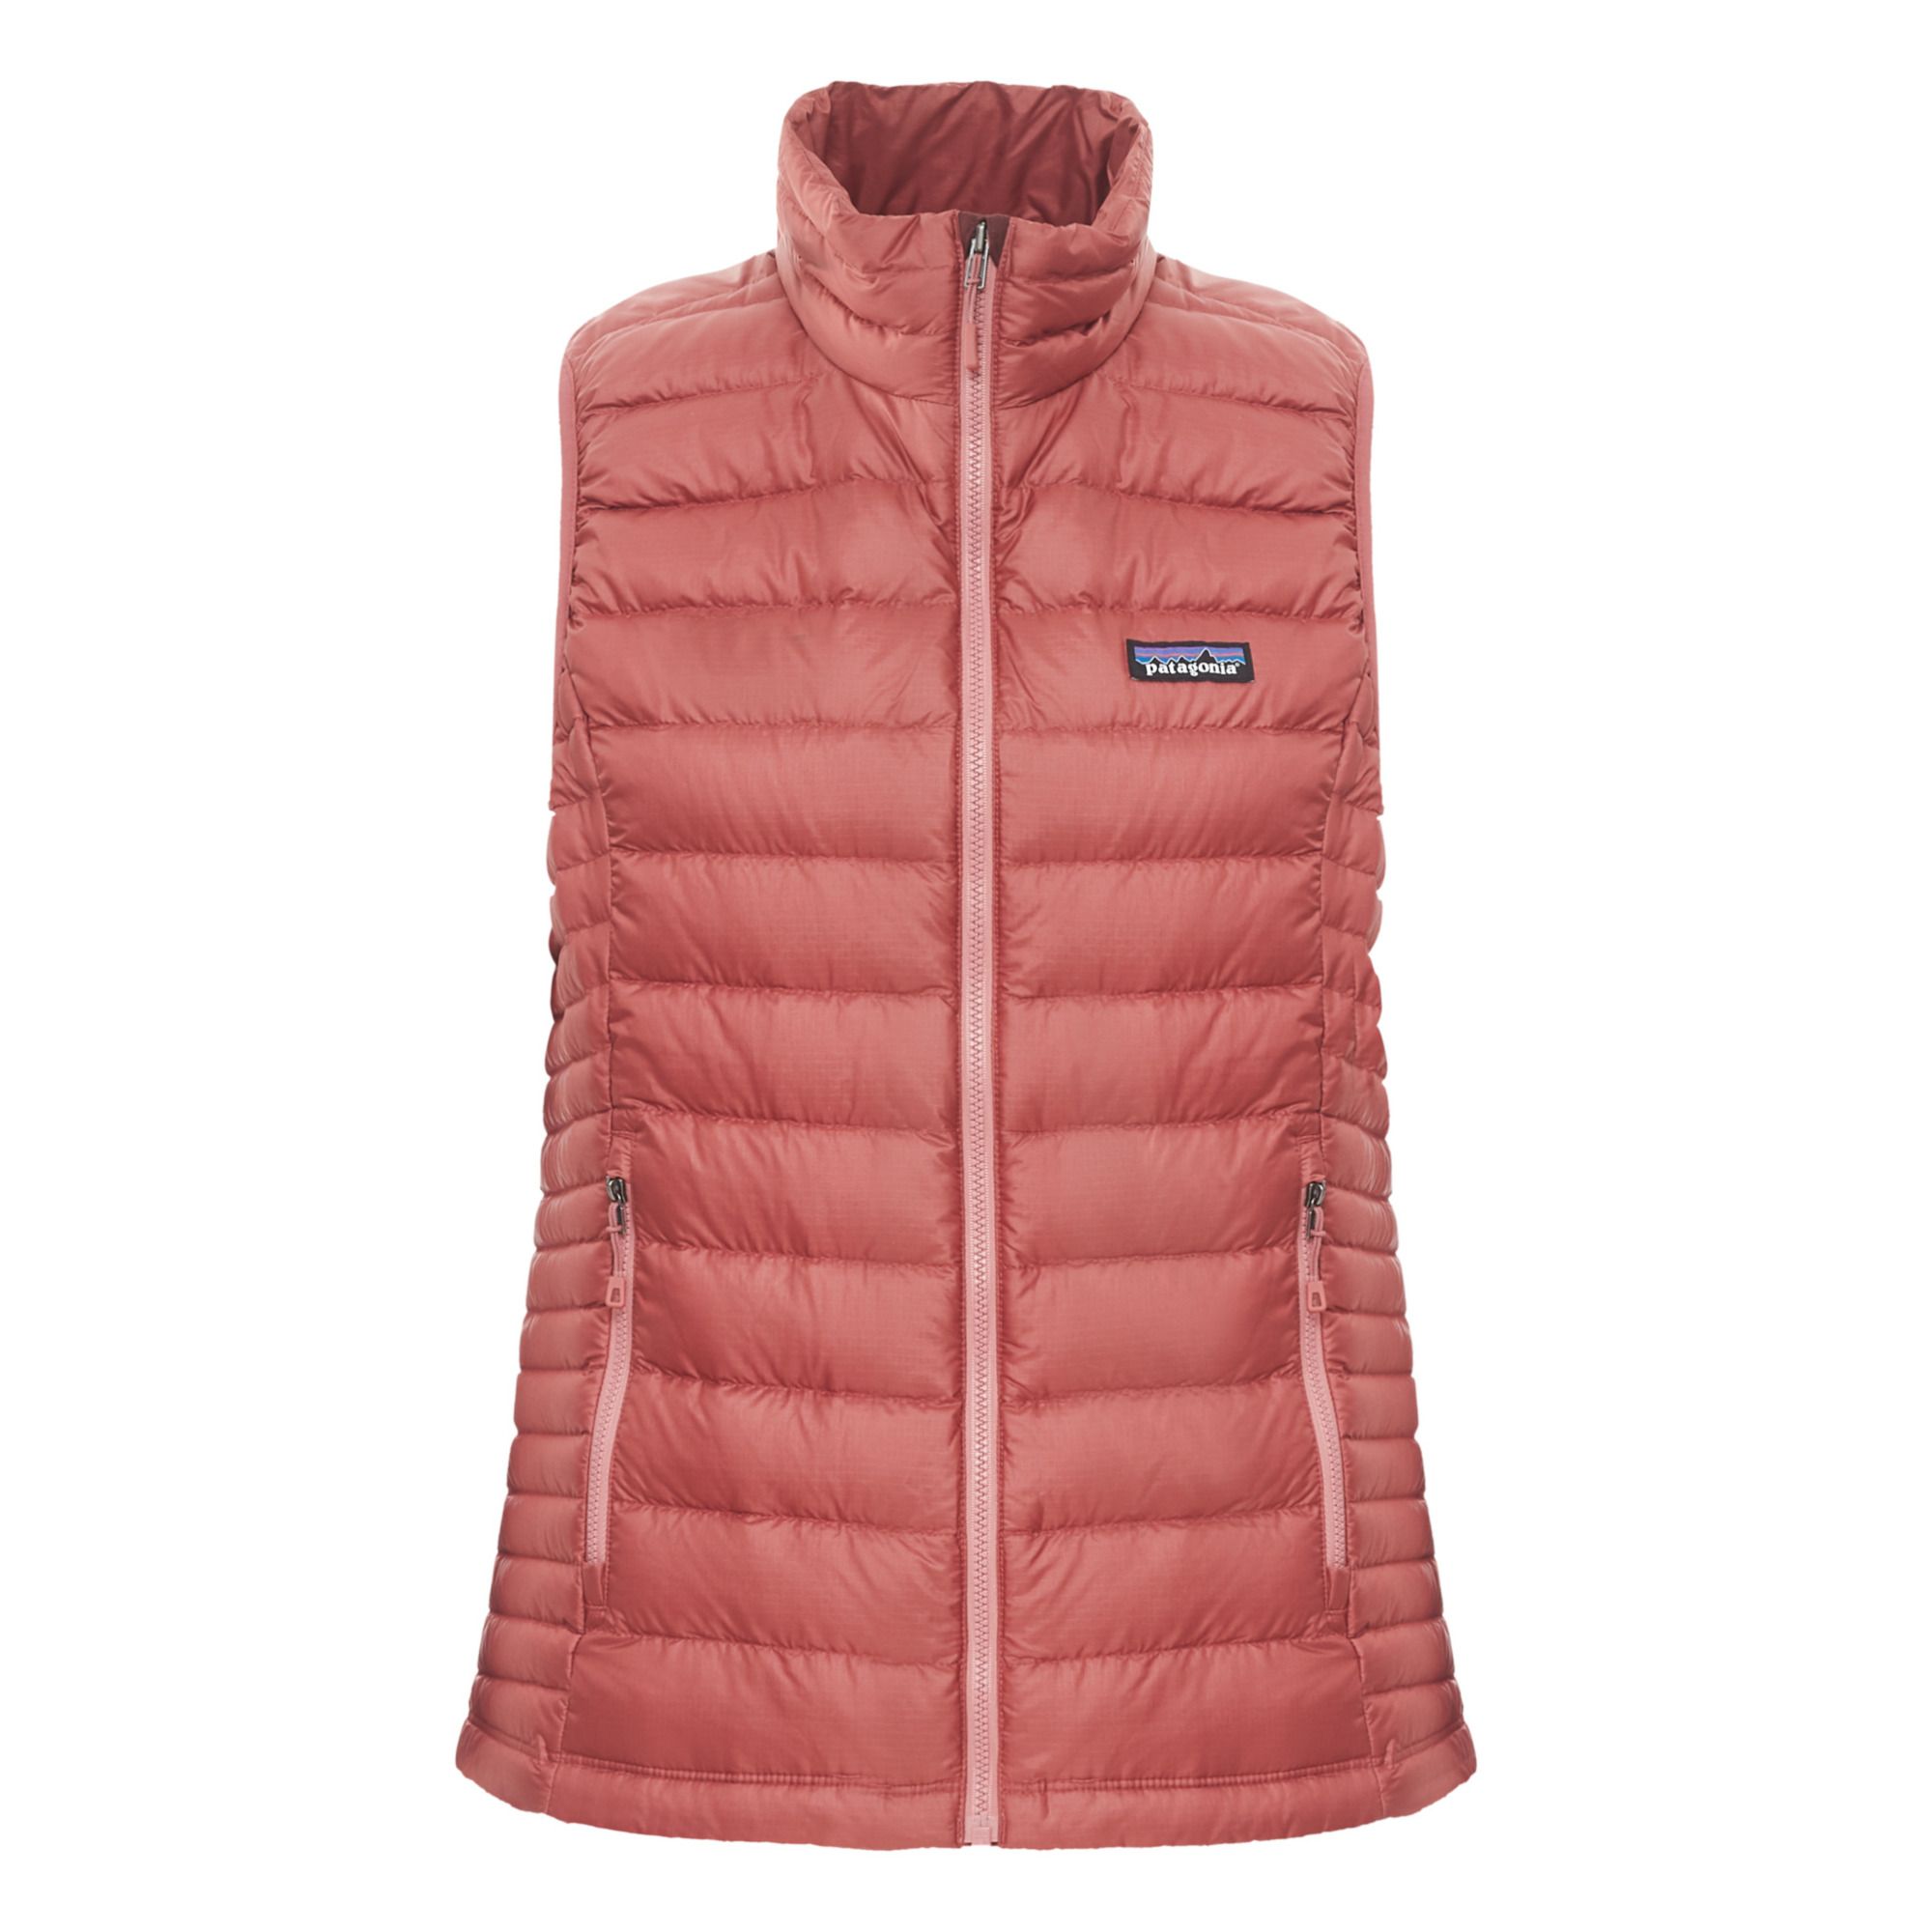 Patagonia - Doudoune Down Sweater Sans Manches - Collection Femme - - Rose